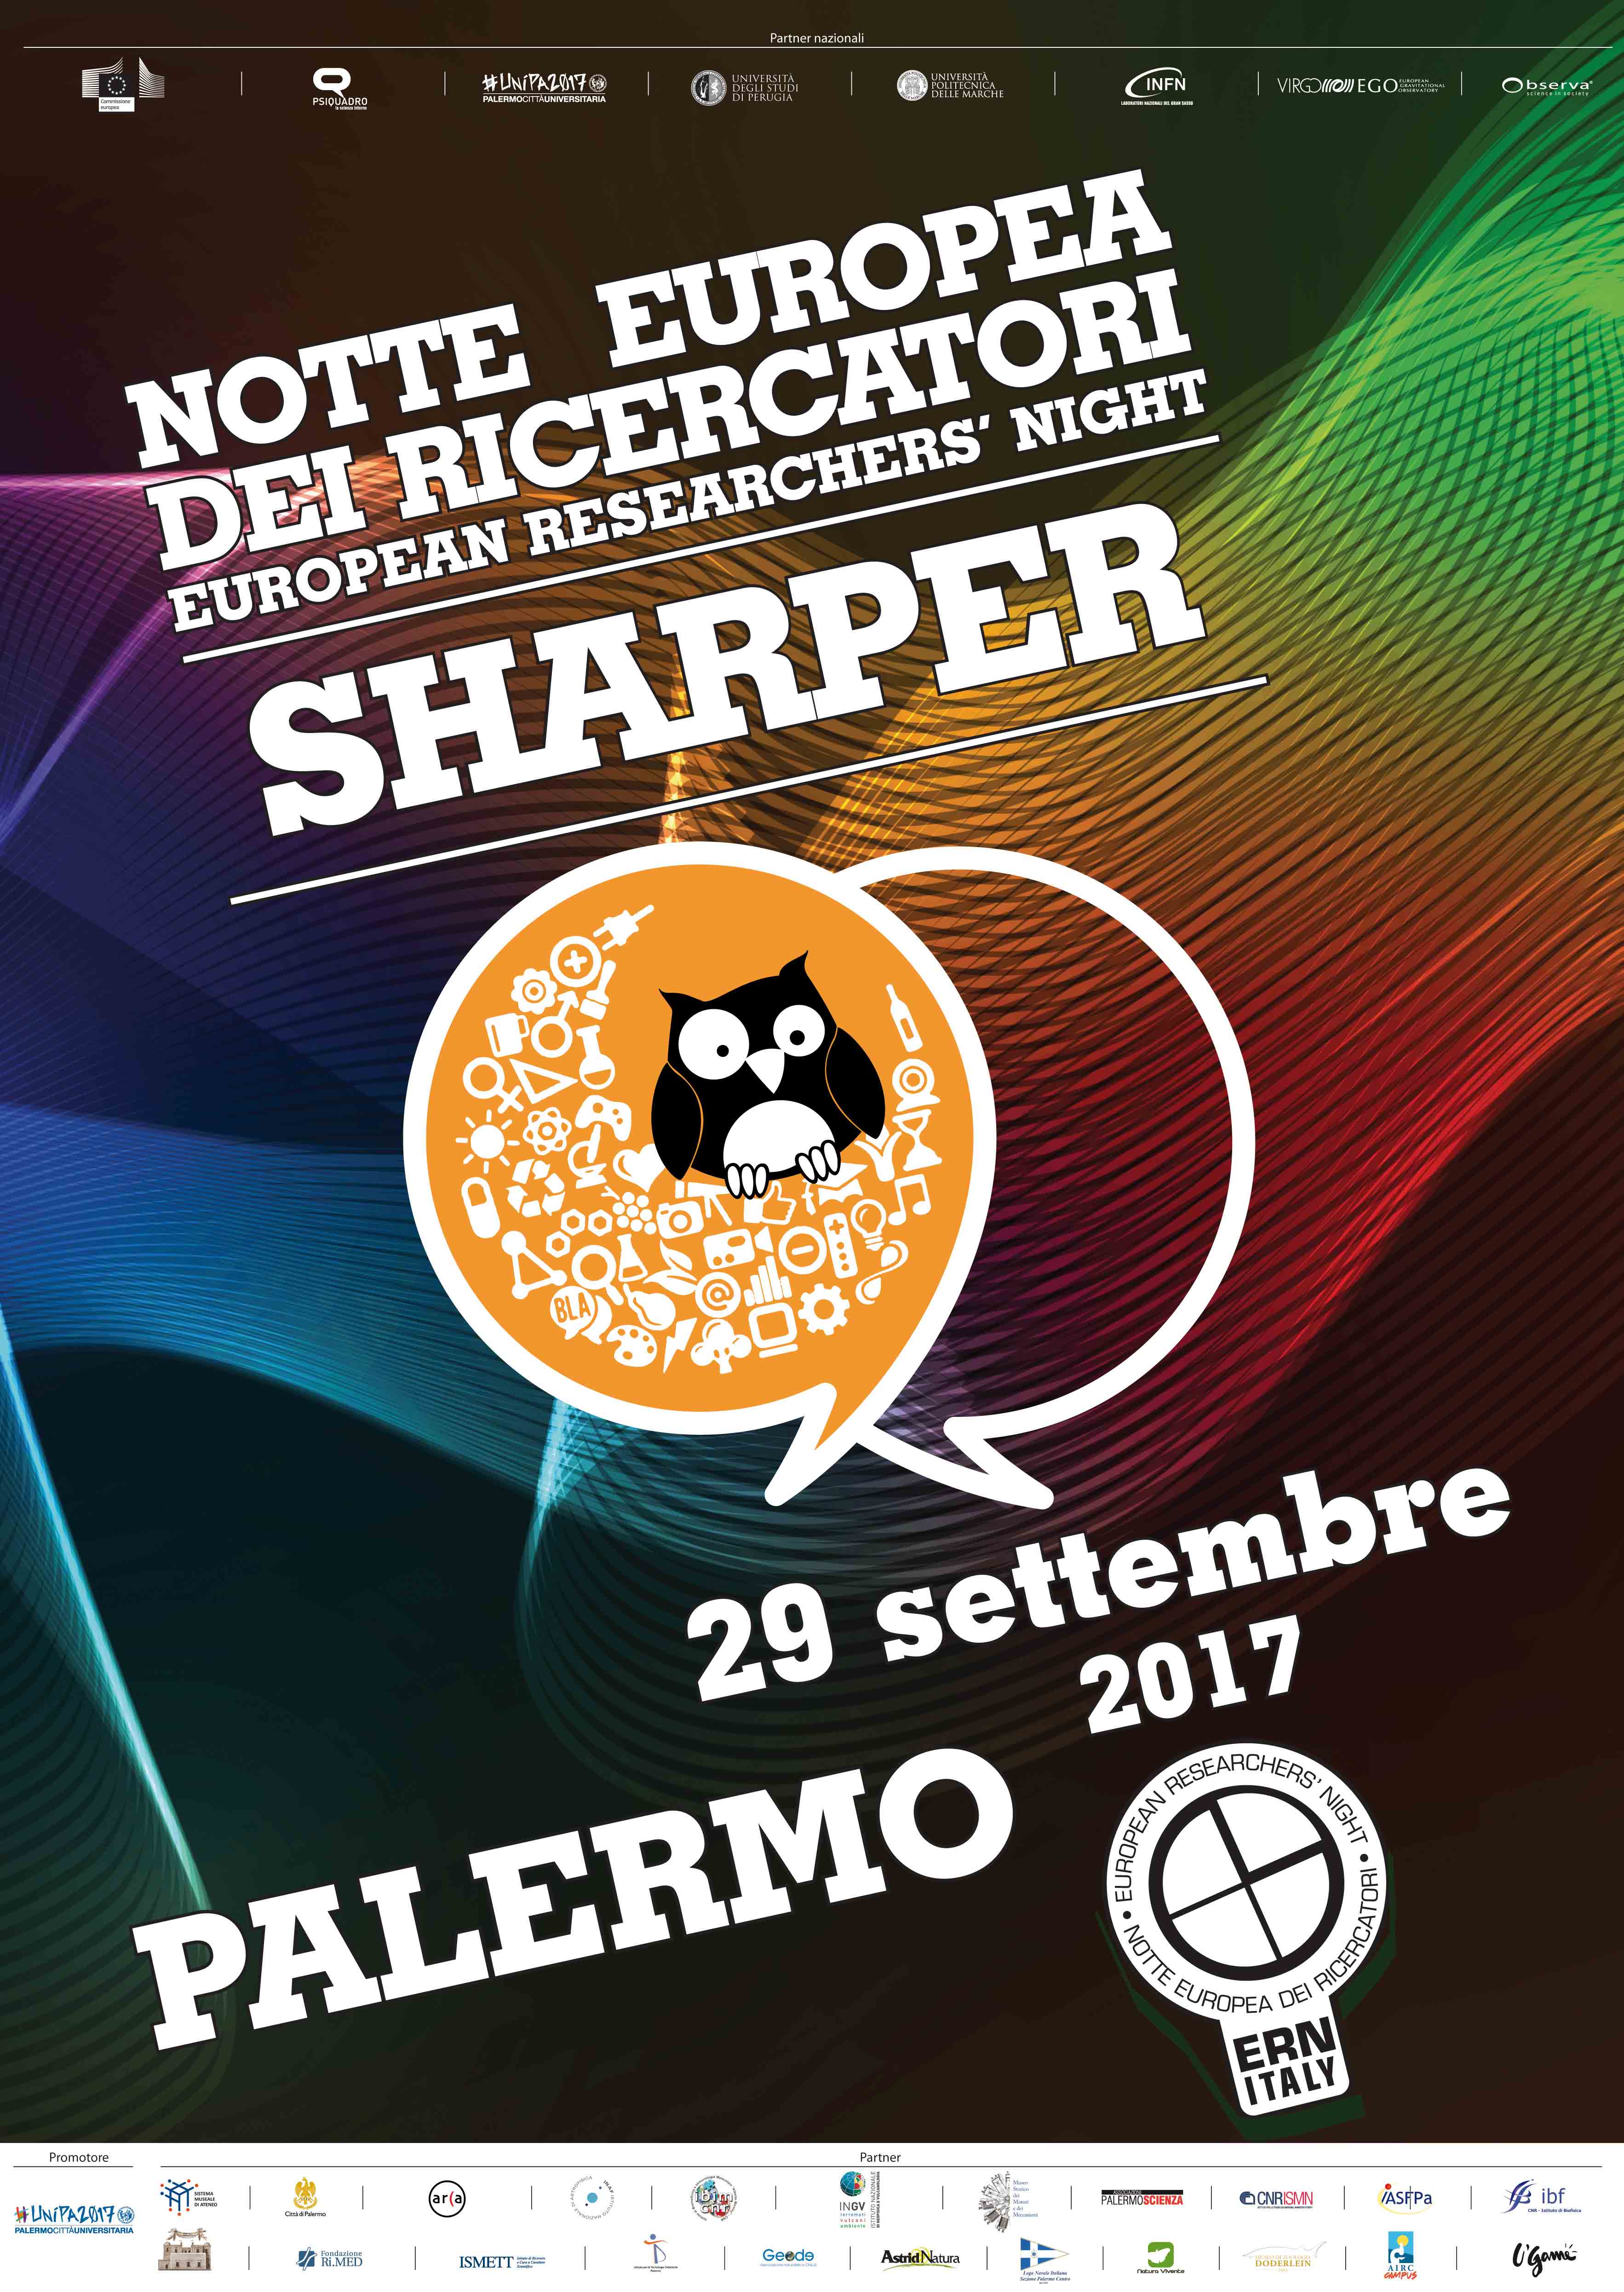 La Notte Europea dei Ricercatori -“SHARPER – Sharing Researchers’ for Engagement and Responsibility”.